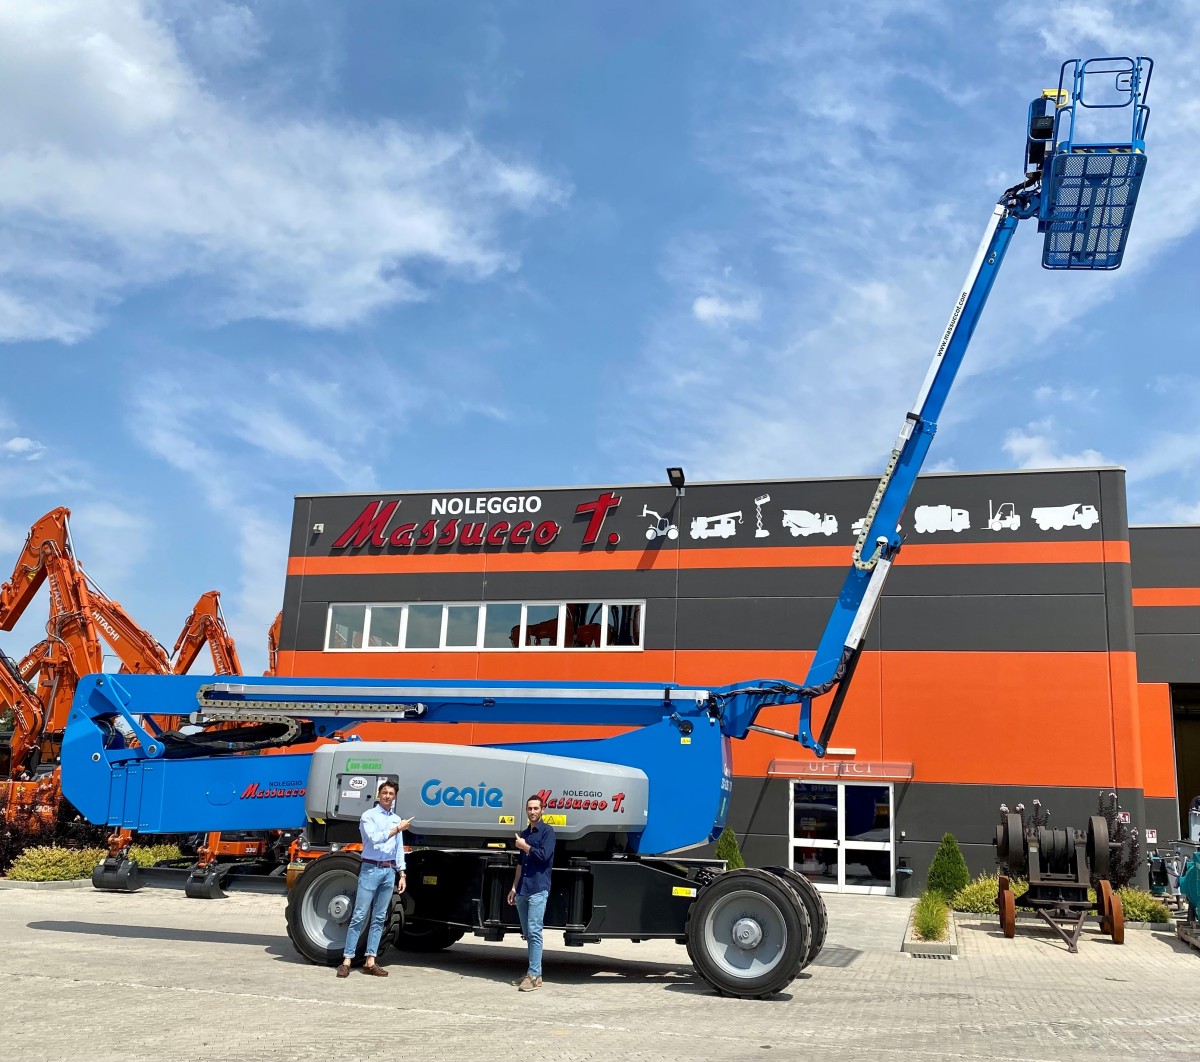 Massucco T. invested in five new Genie ZX-135/70 articulated boom lifts